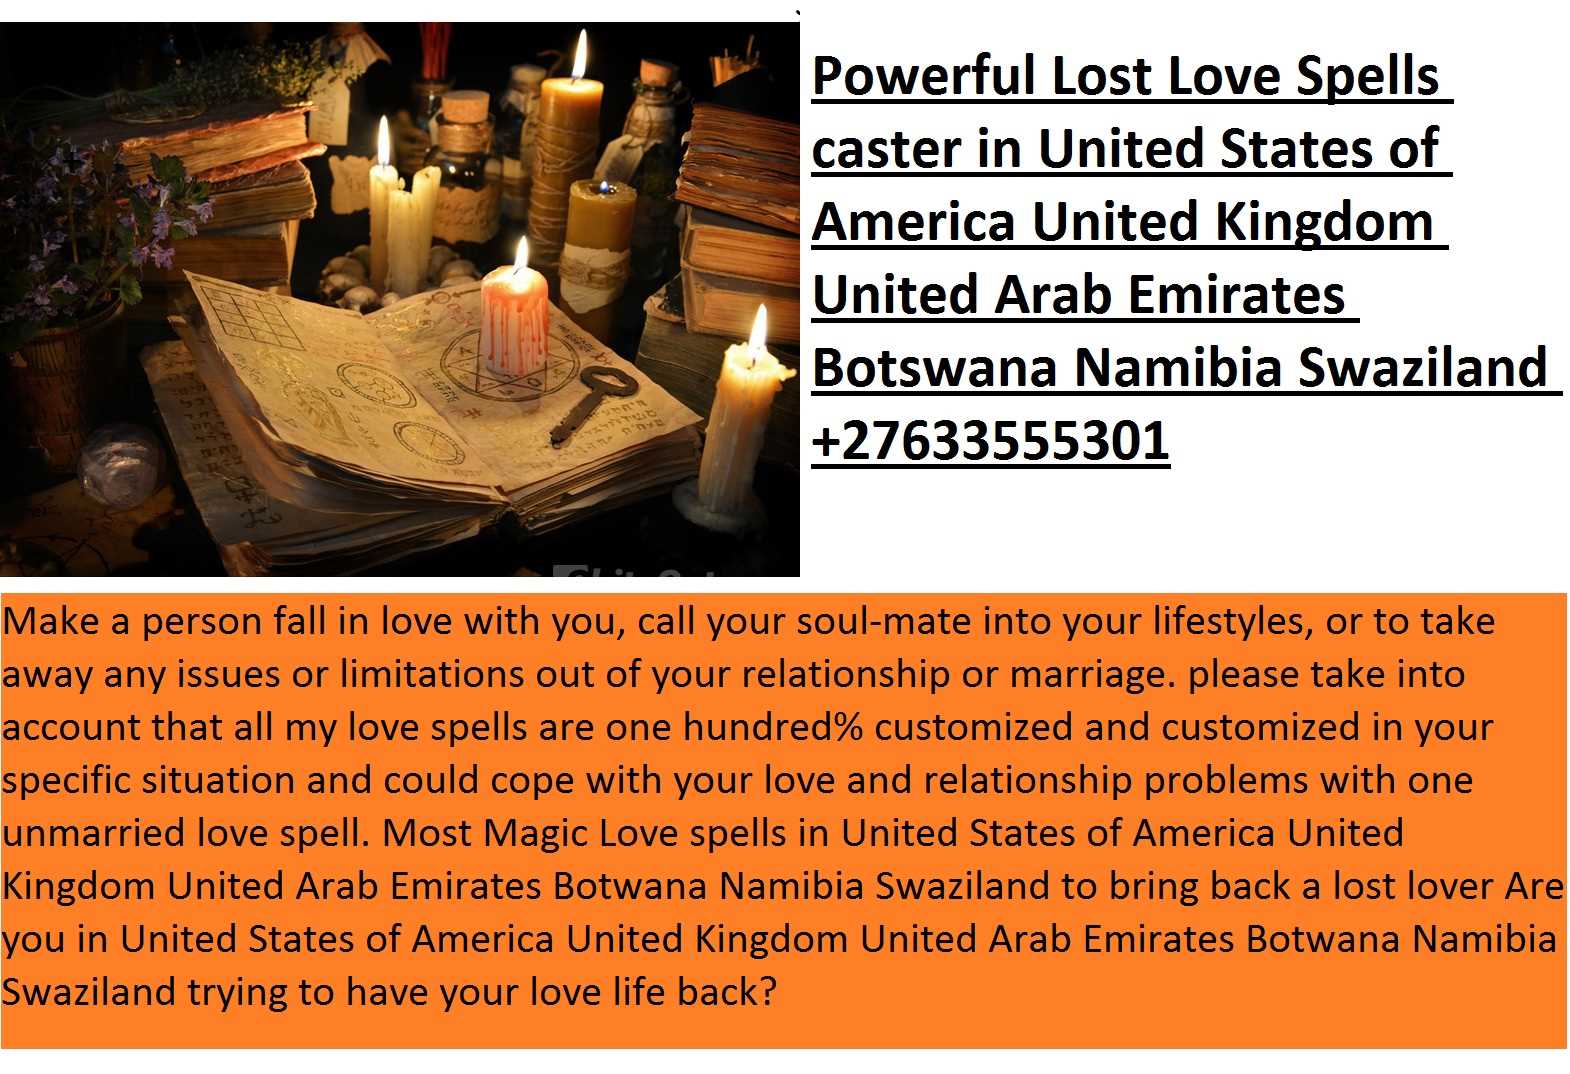 Genuine spell caster guaranteed lost love spells instant results marriage bring back ex lost partner+27633555301 USA